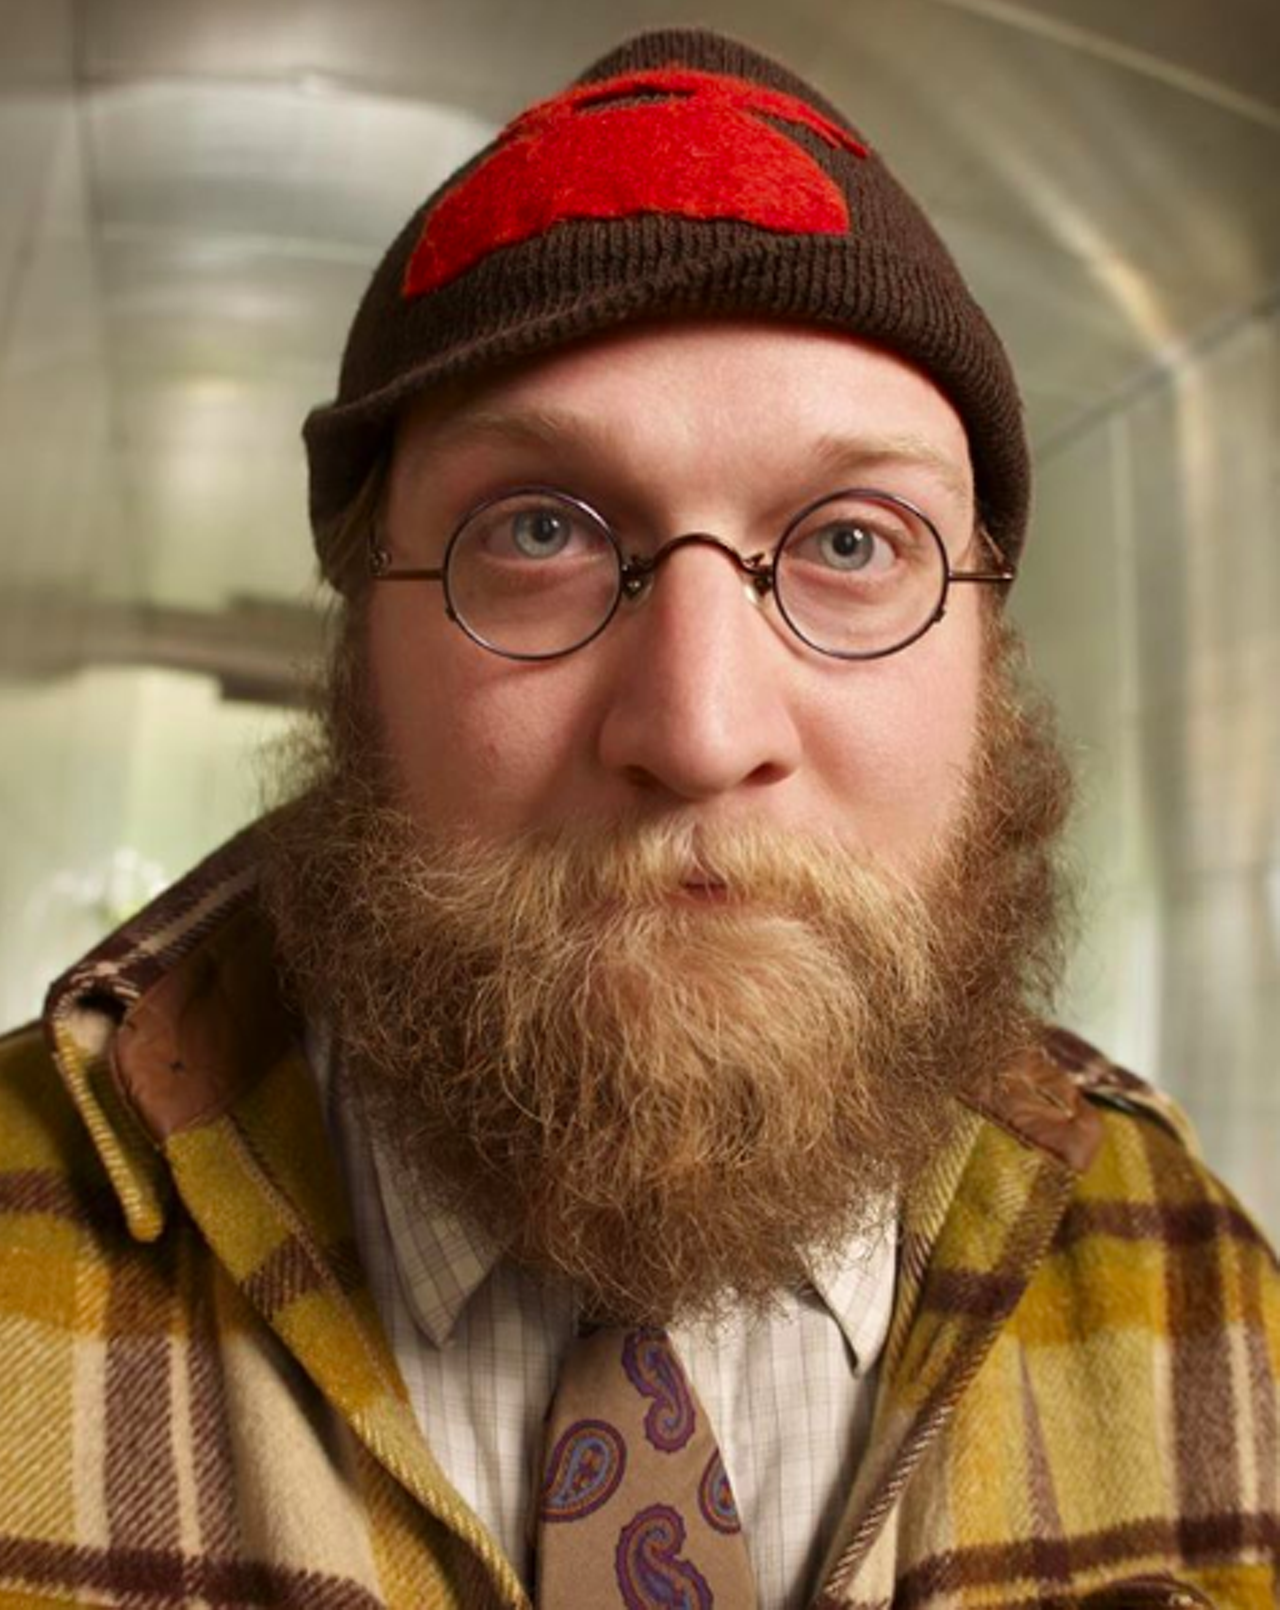 Pendleton Ward
Animator, writer and voice actor Pendleton Ward, best known for Adventure Time, was born in the Alamo City in 1982. Though he now resides in Los Angeles, the cartoon wiz is a graduate of the now-LEE High School.
Photo via Instagram / weeb.on.crack